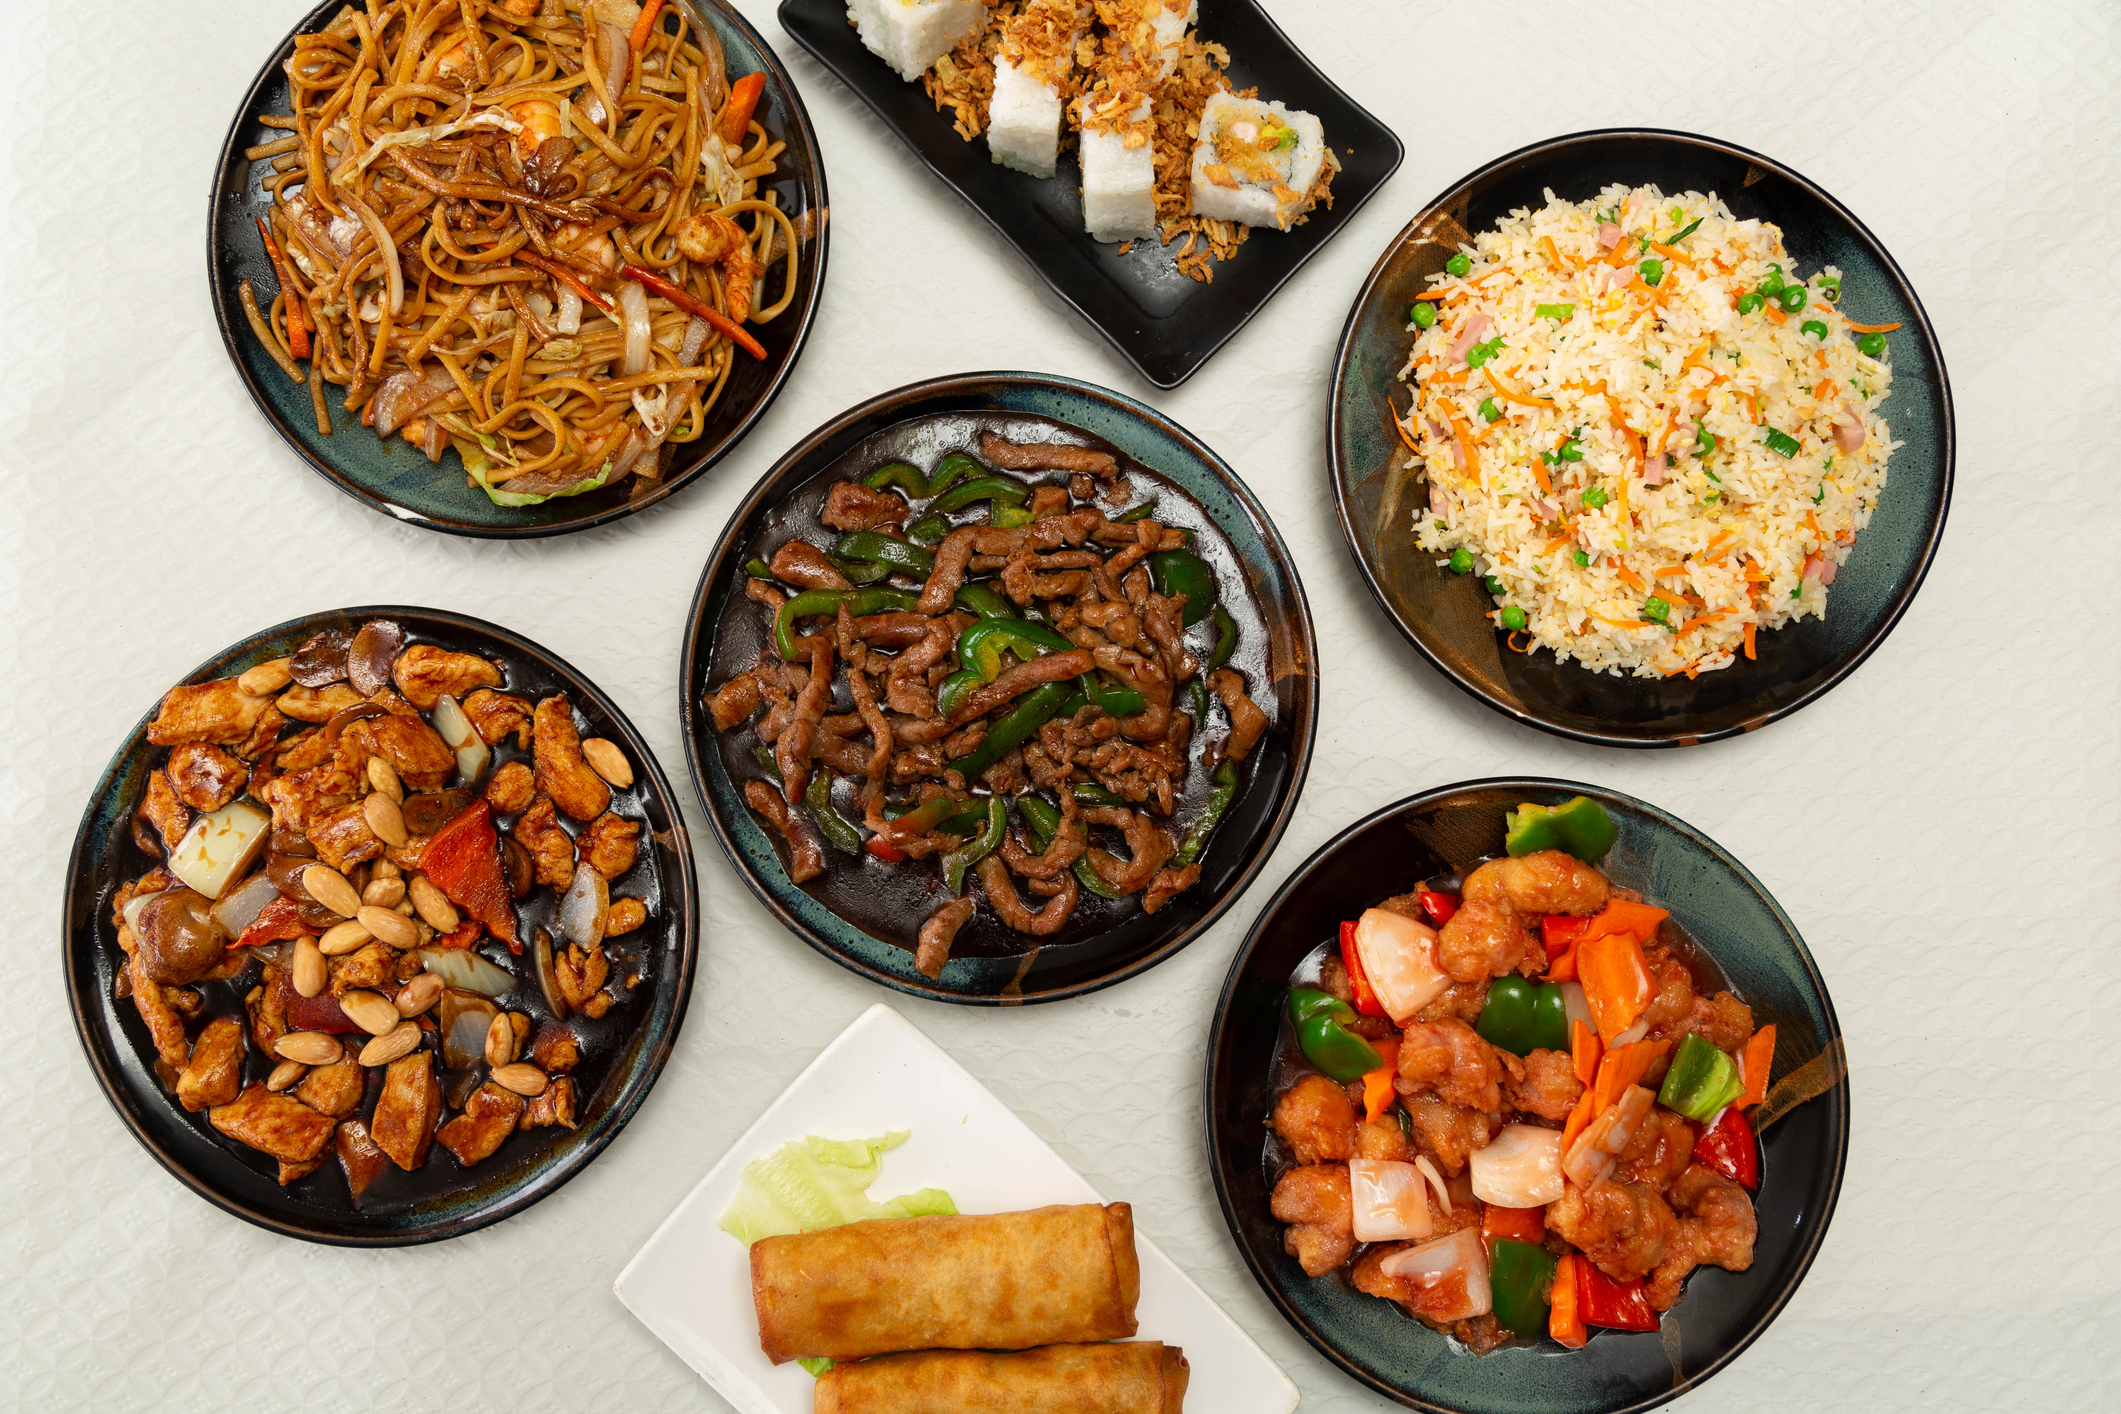 Indulge in This Delicious Chinese Buffet in Conroe at Pine Hollow